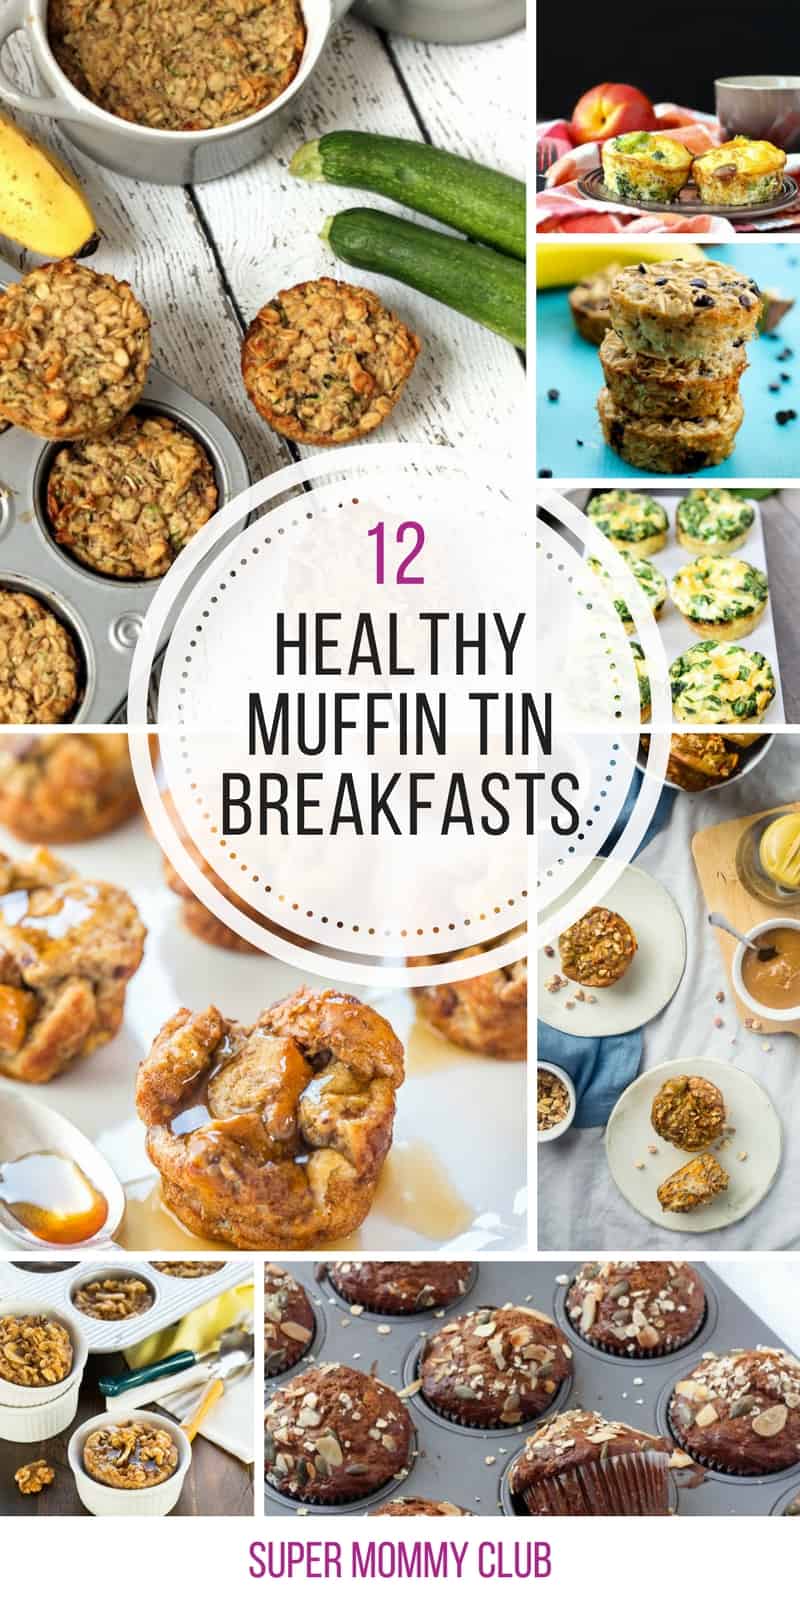 12 Healthy Breakfasts You Can Make in a Muffin Tin